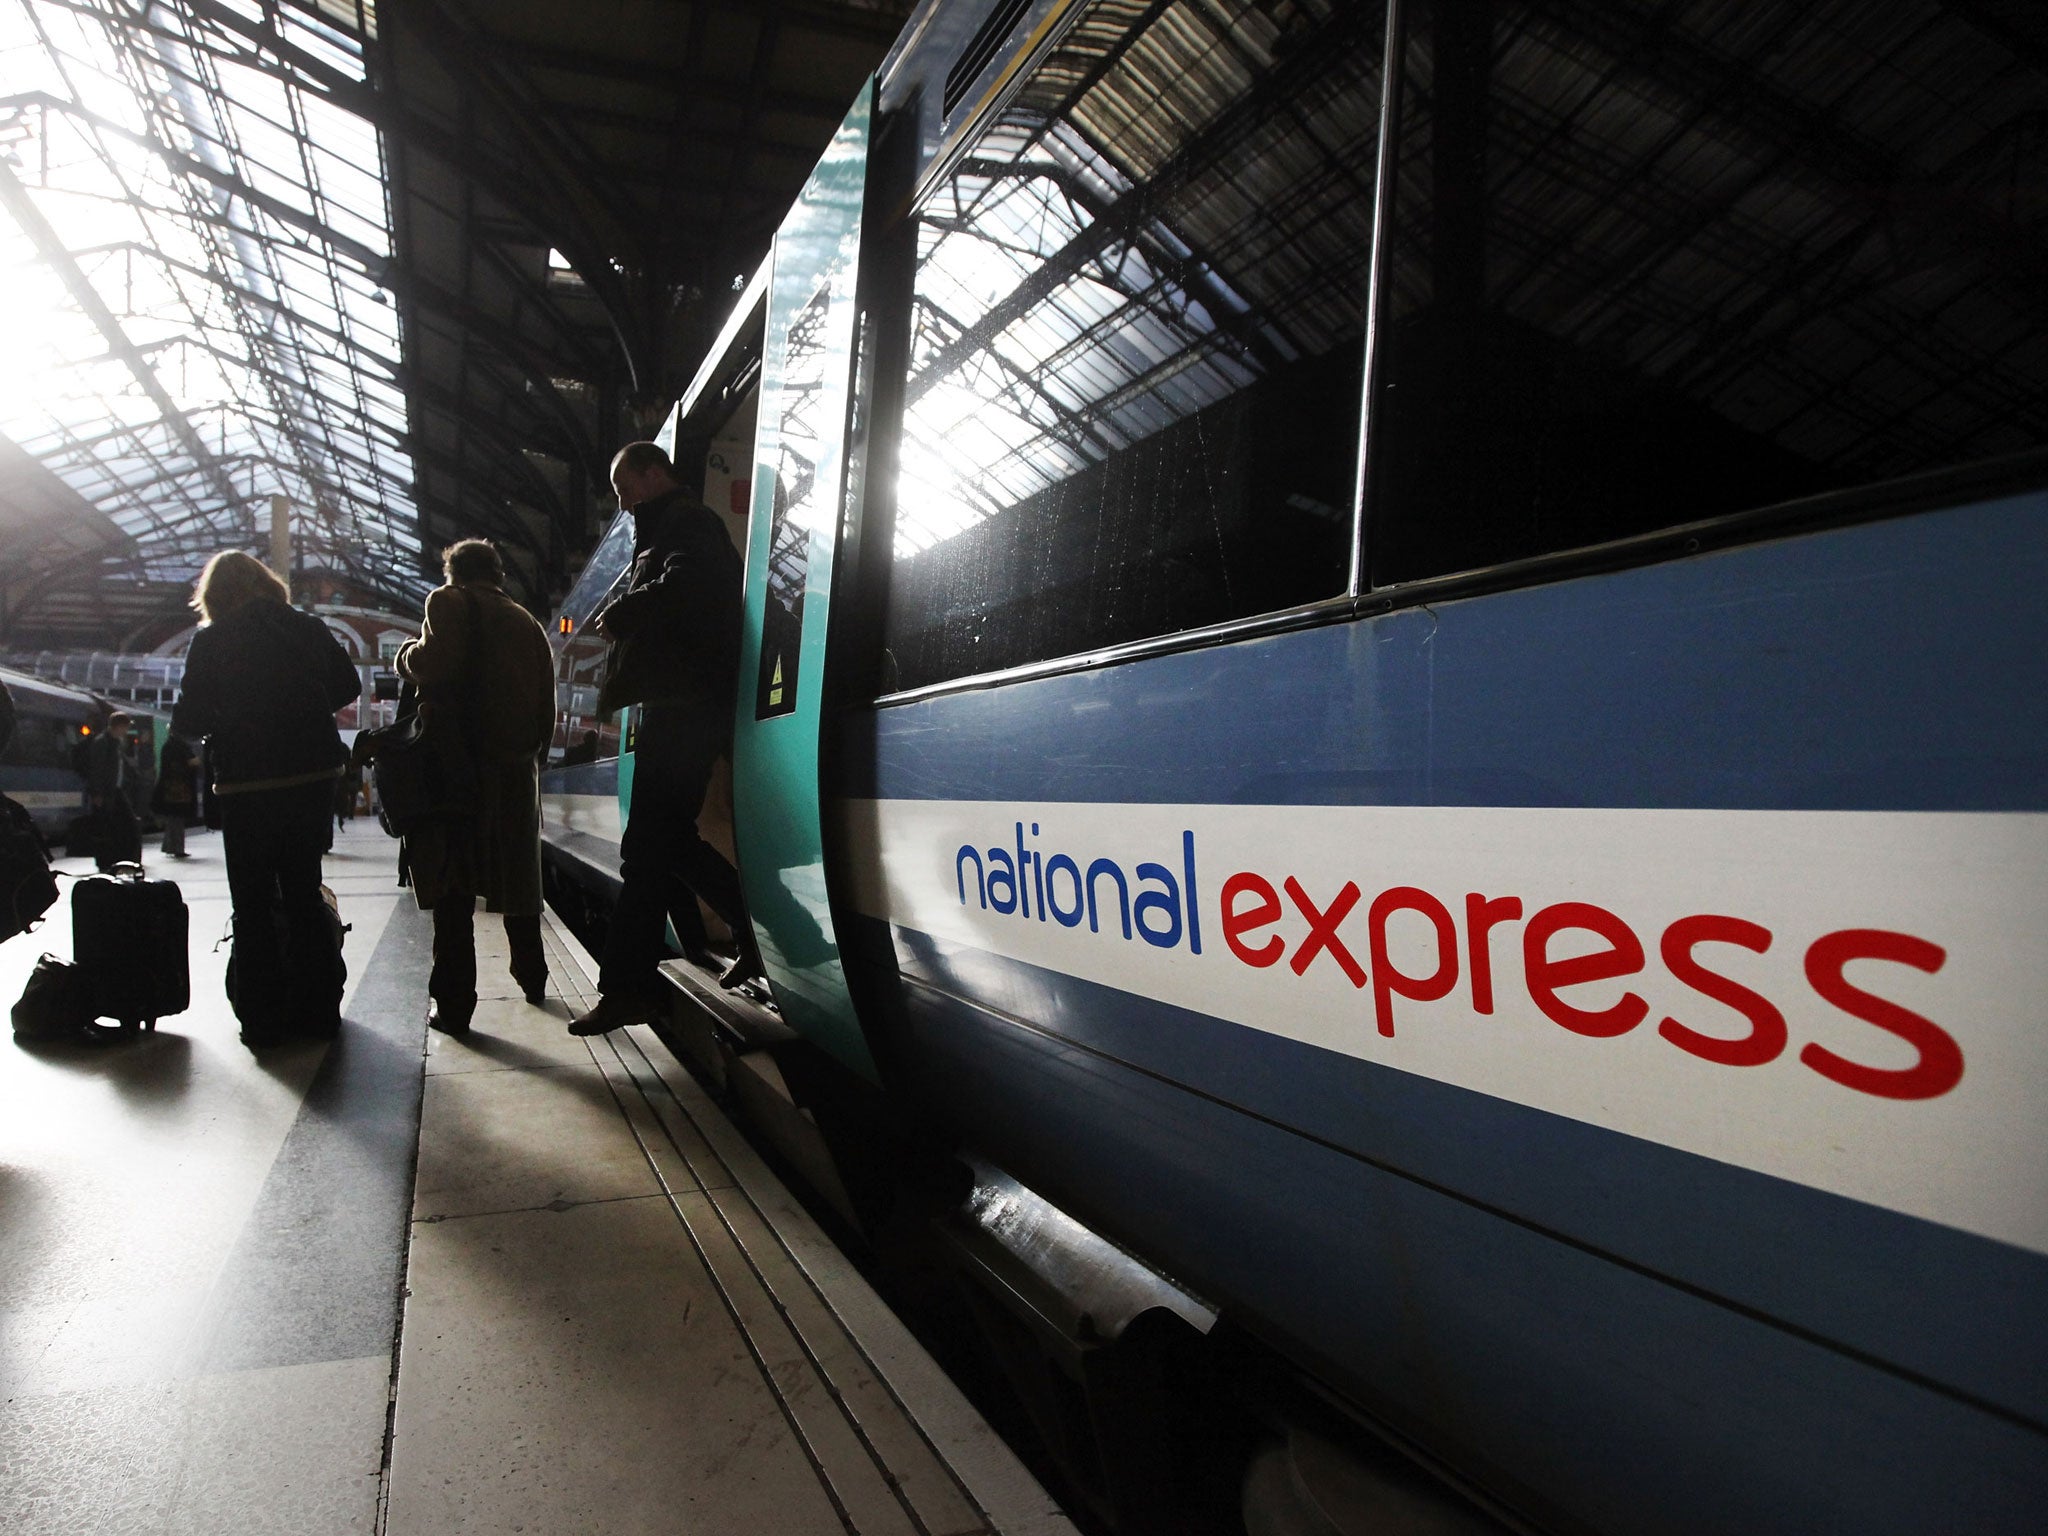 DOR took over East Coast in November 2009 when National Express pulled out of the franchise